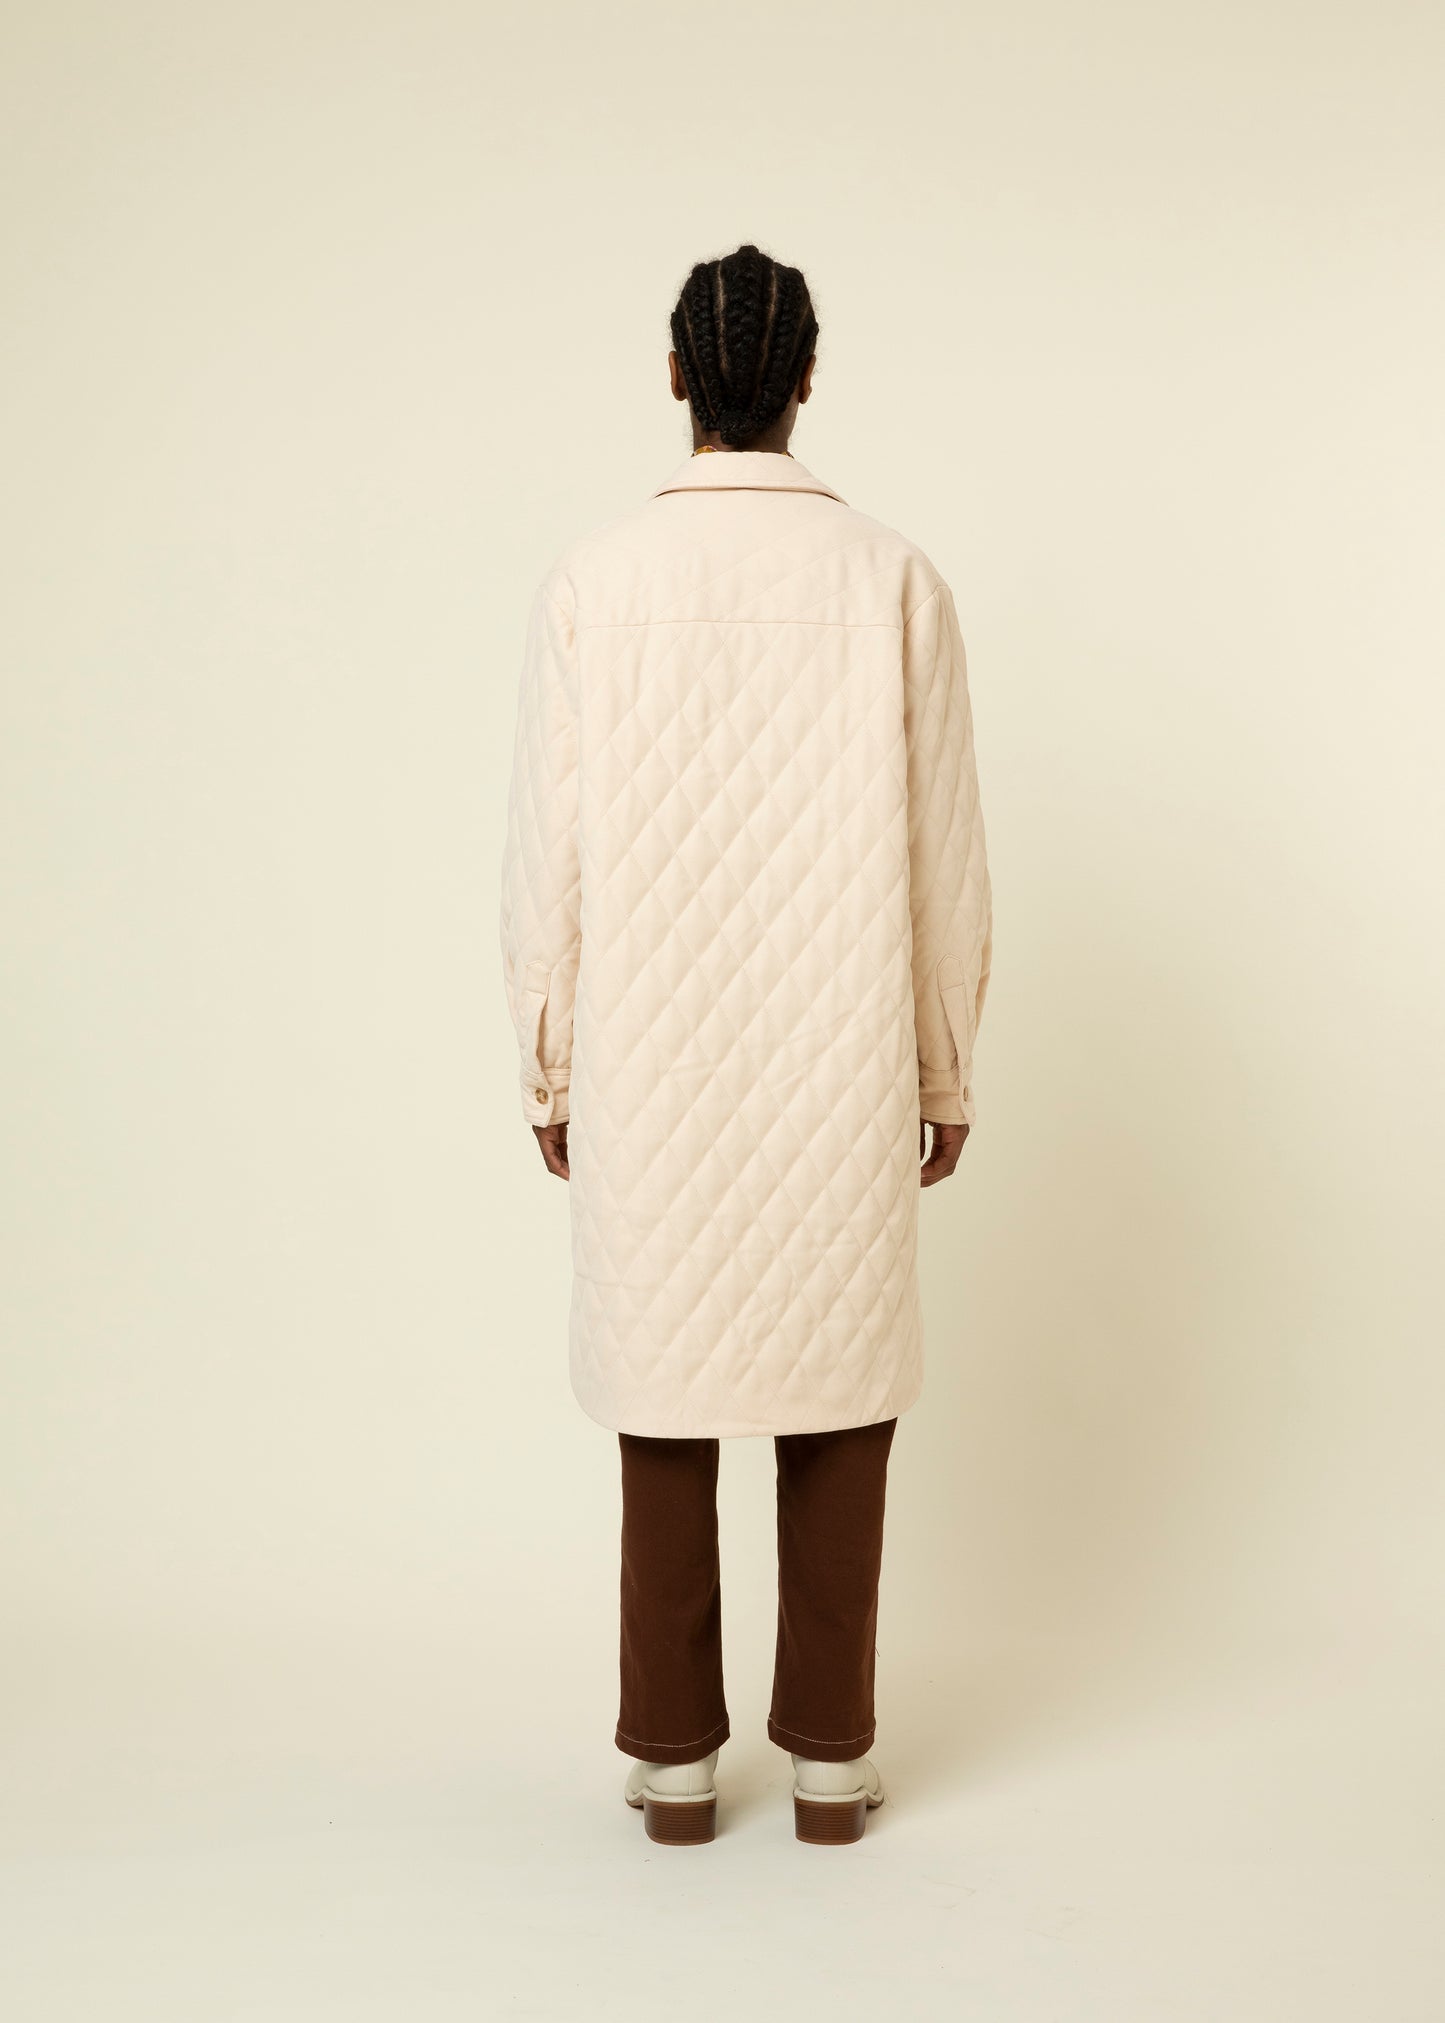 Violaine Quilted Coat - FINAL SALE